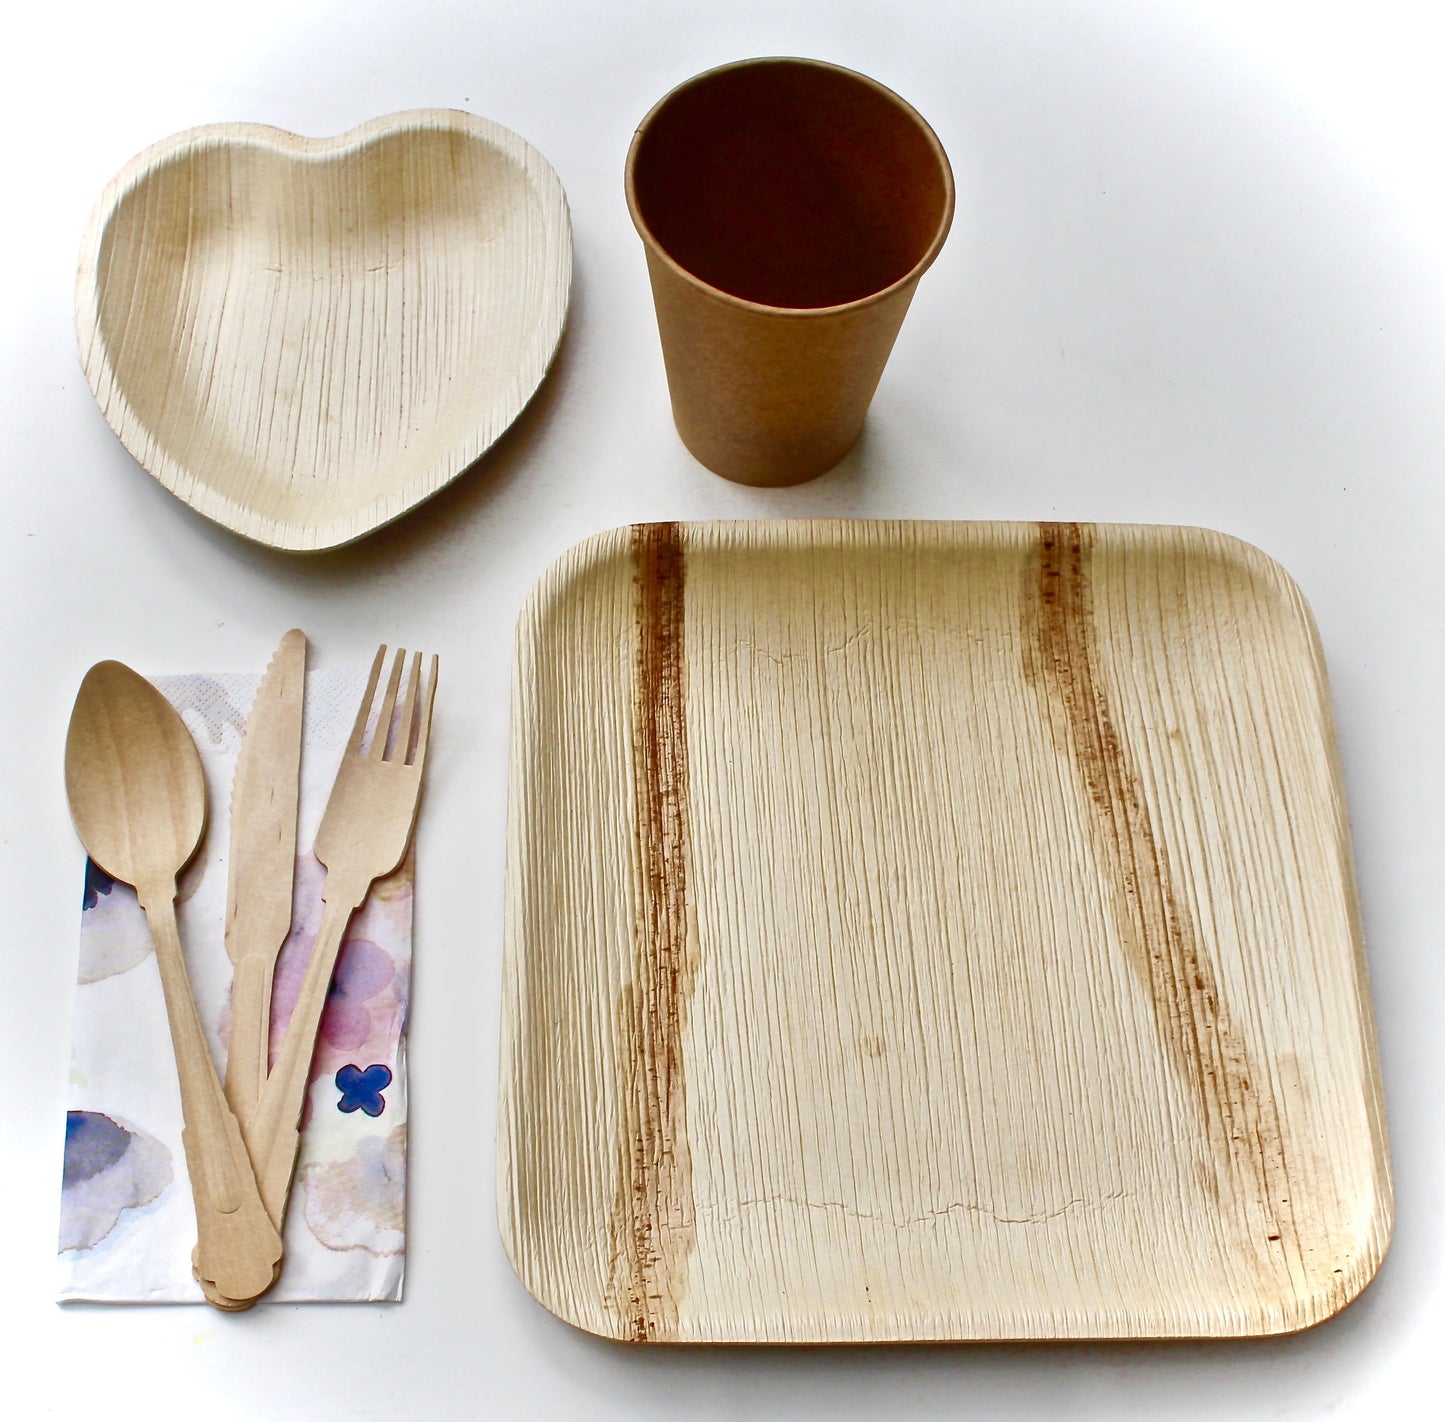 Bamboo type palm leaf plates 25 Pic 6x9" - 25 pic Heart 6" - 75 Pic Cutlery - 30 pic Napkin- 25 cup